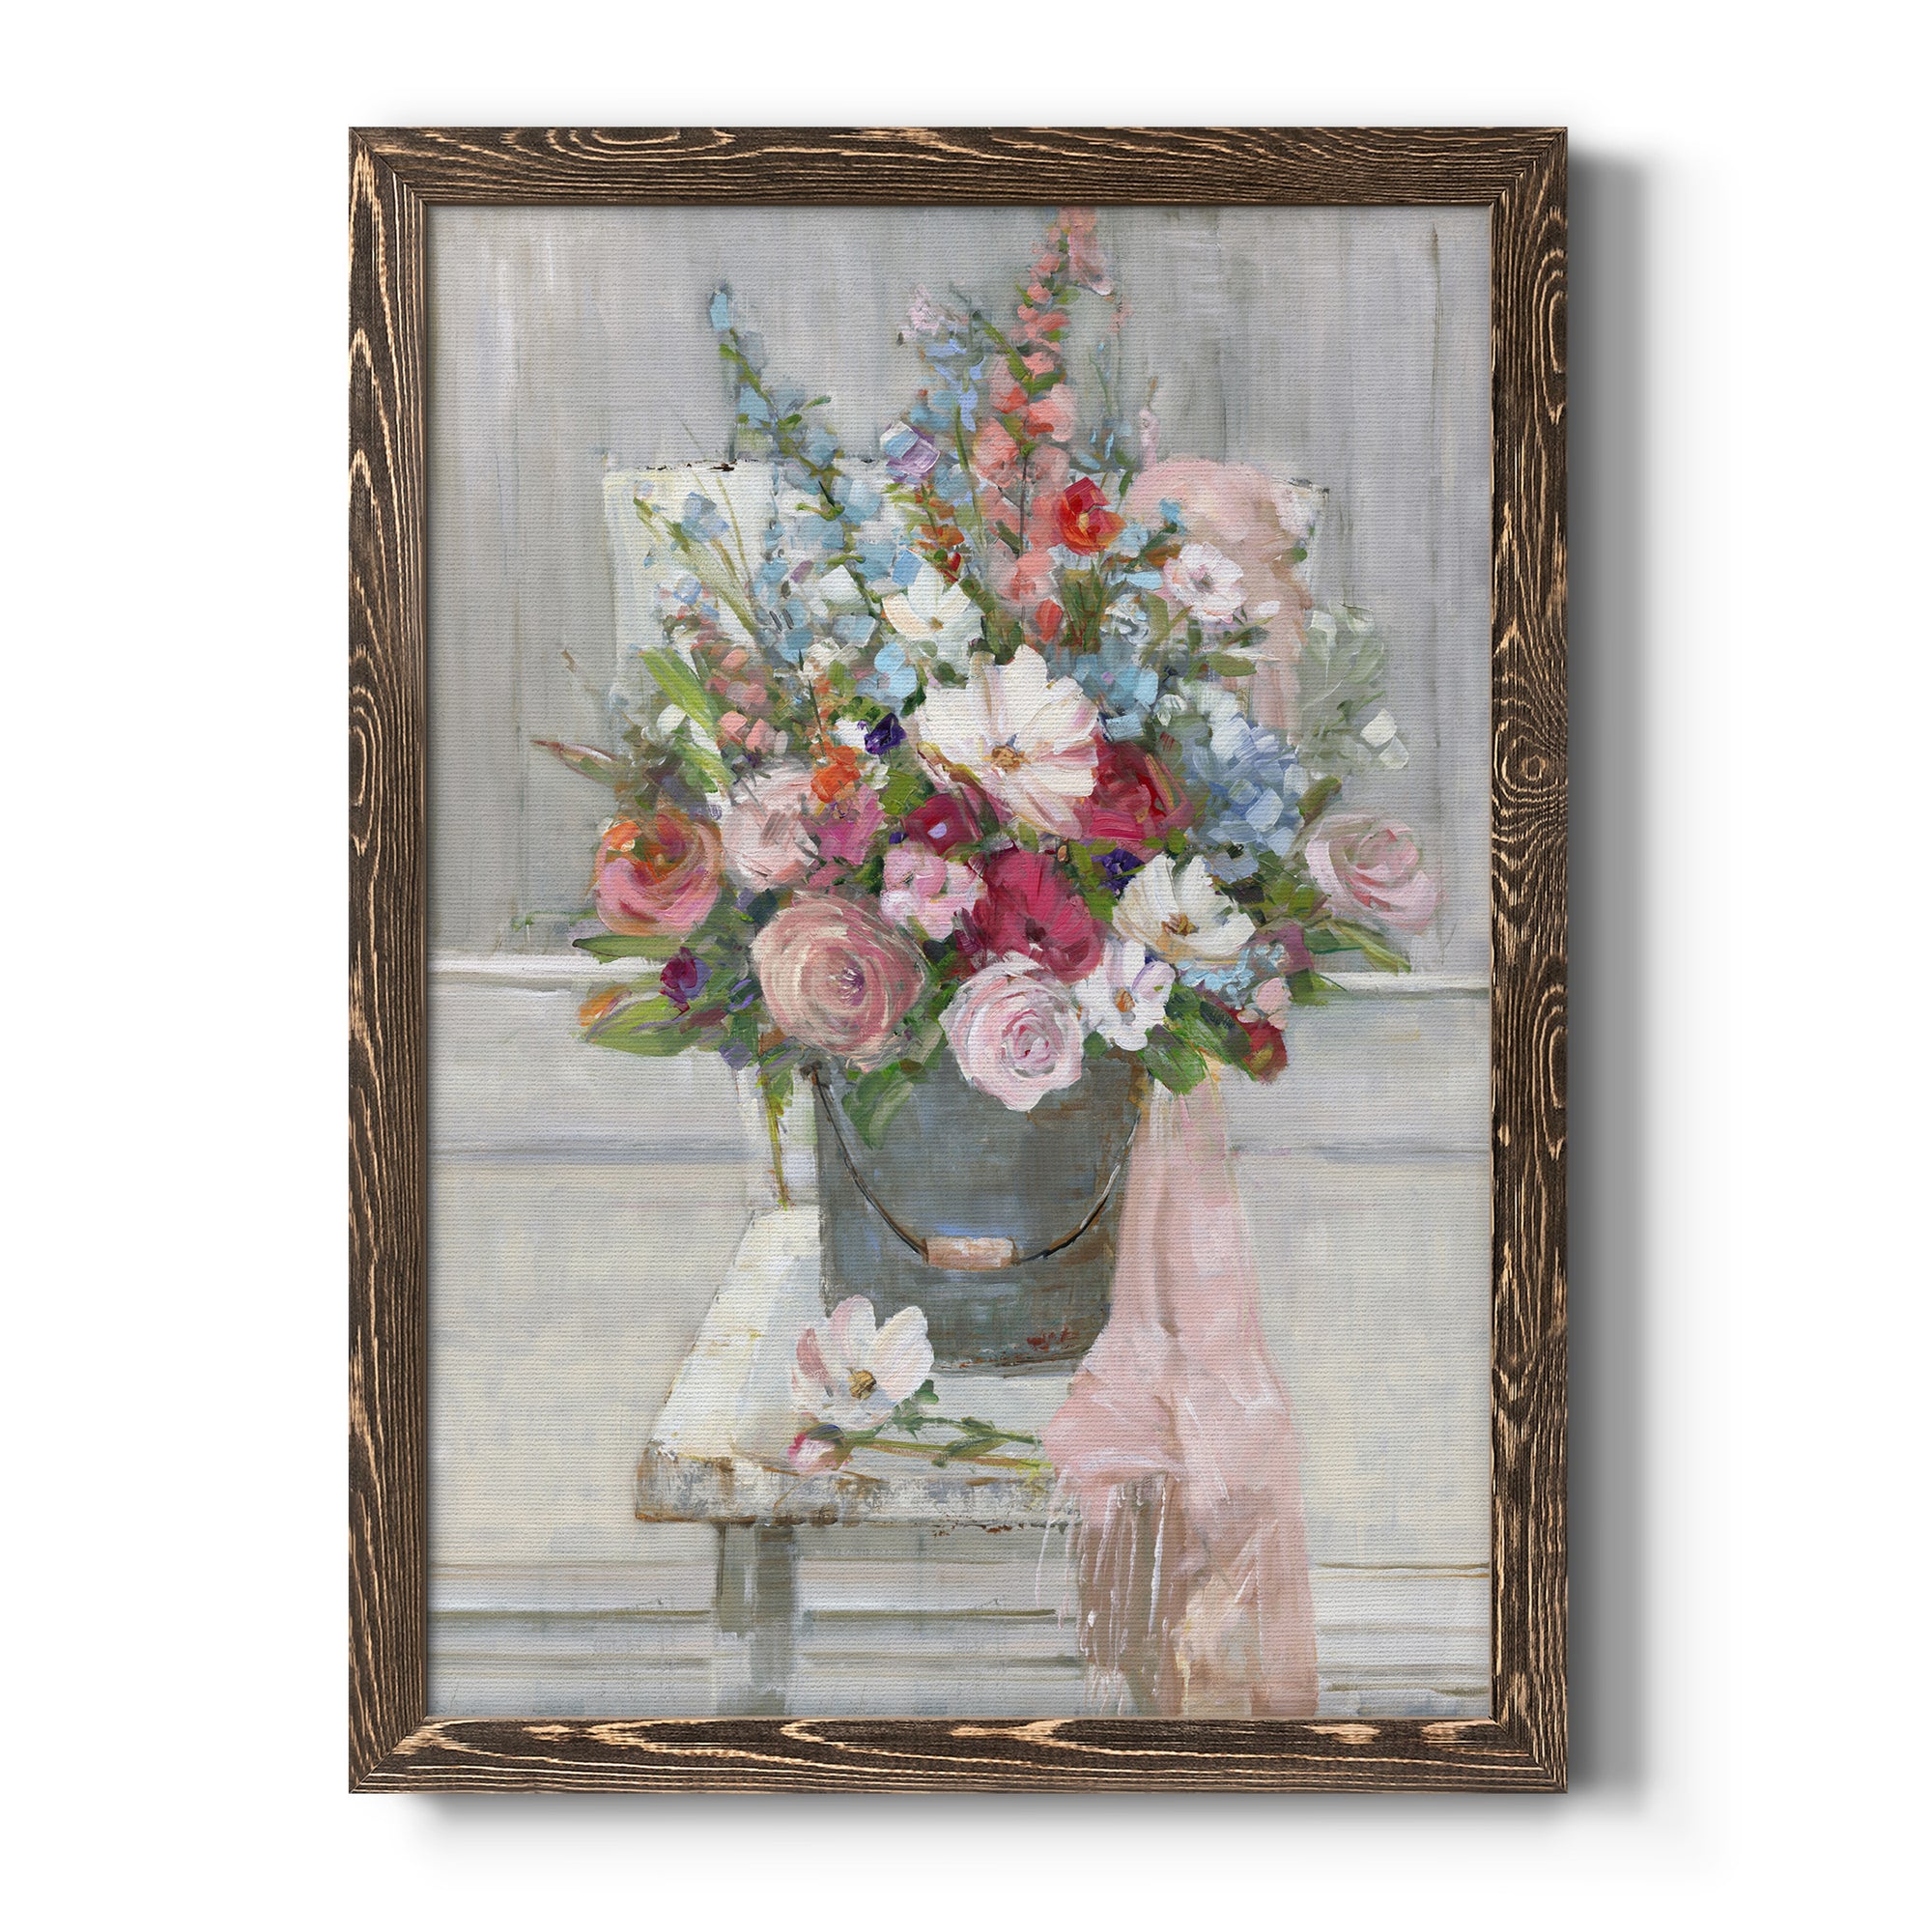 Sit Down For A Spell - Premium Canvas Framed in Barnwood - Ready to Hang